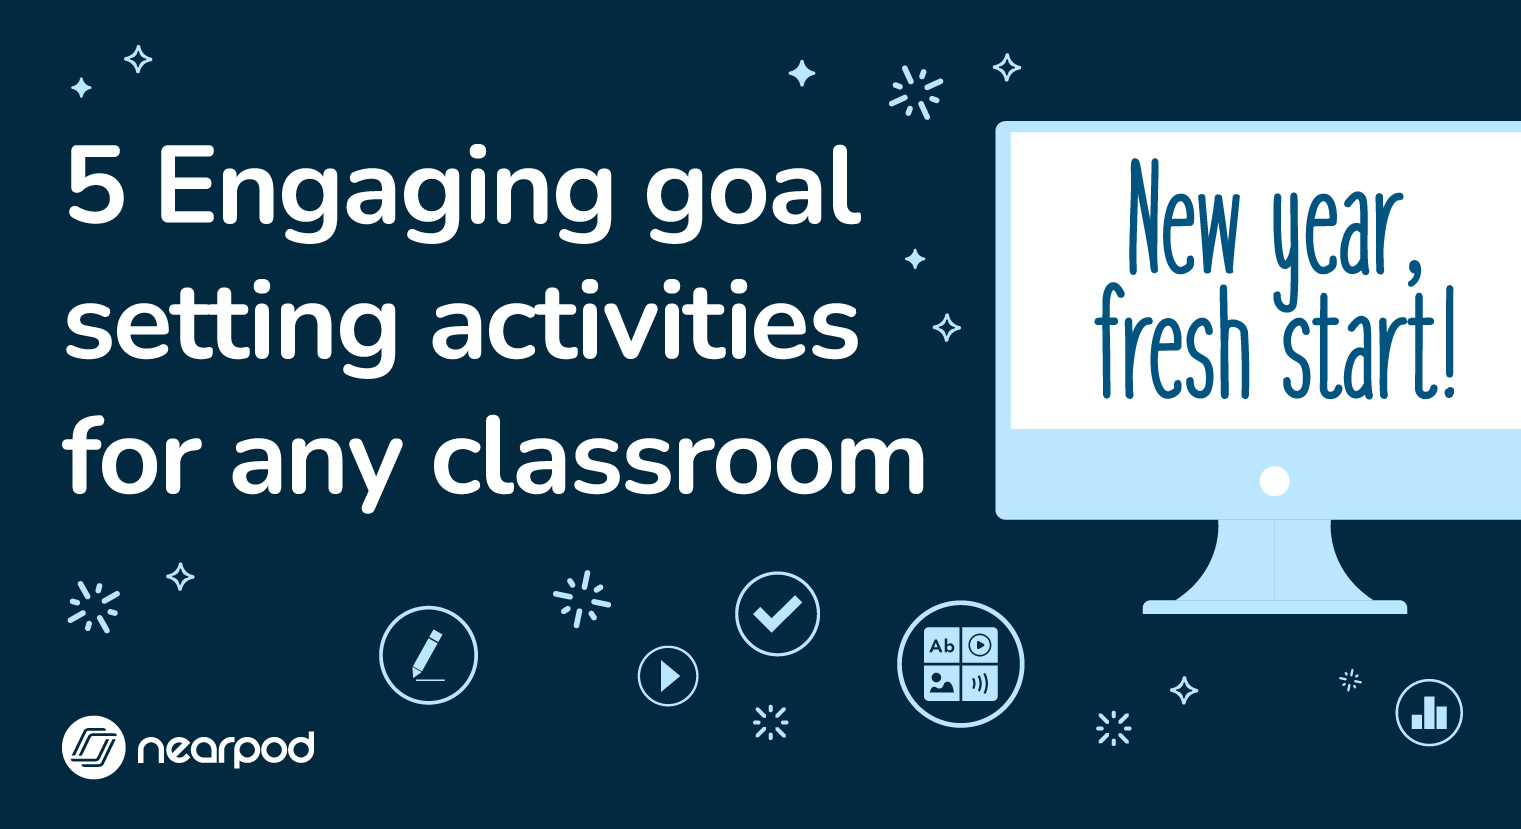 5 Engaging goal setting activities for any classroom blog image